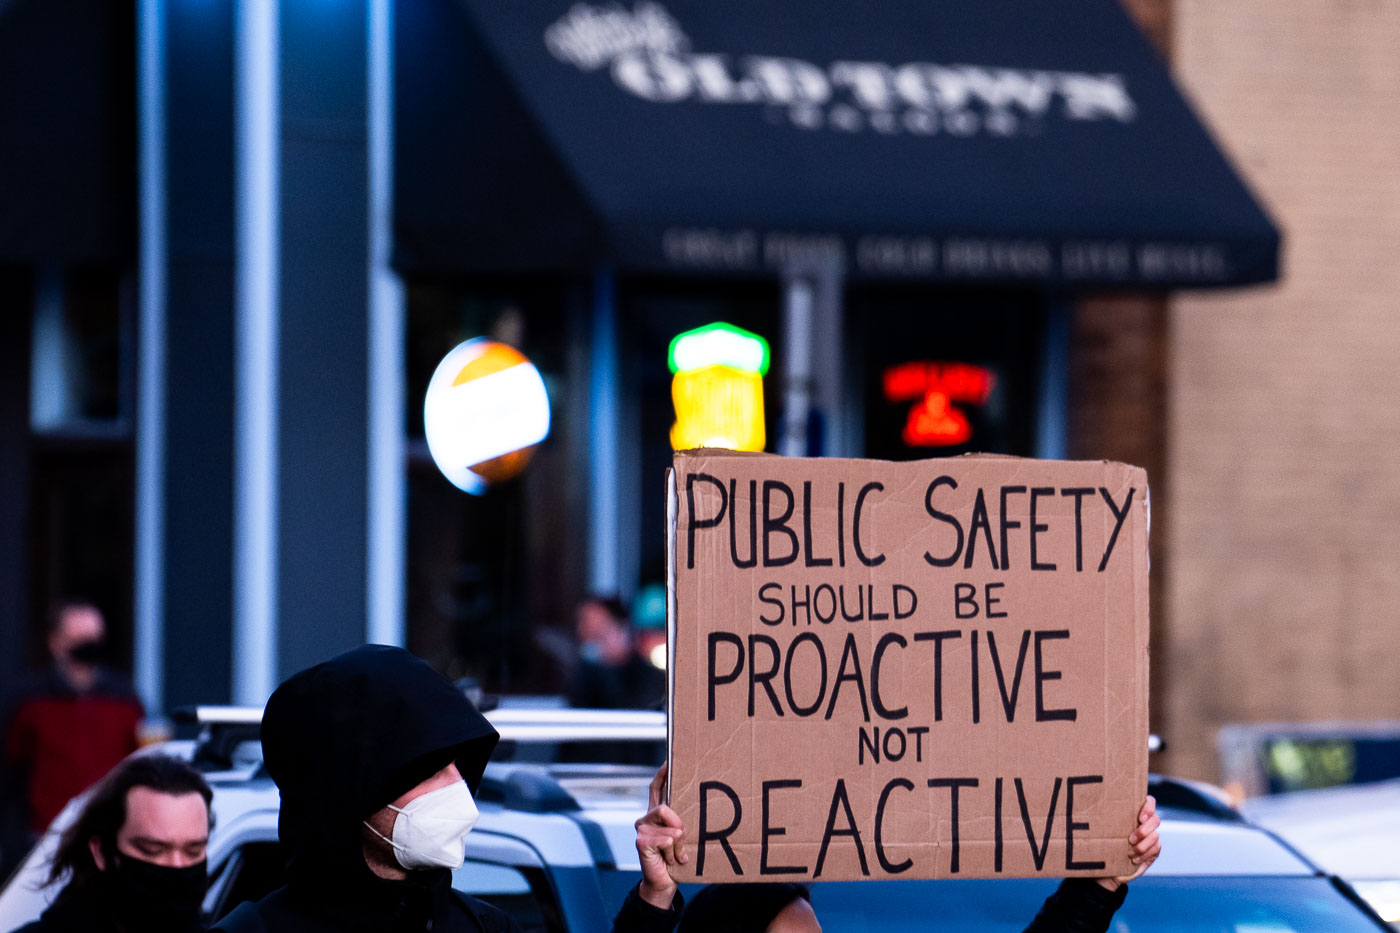 Public safety should be proactive not reactive